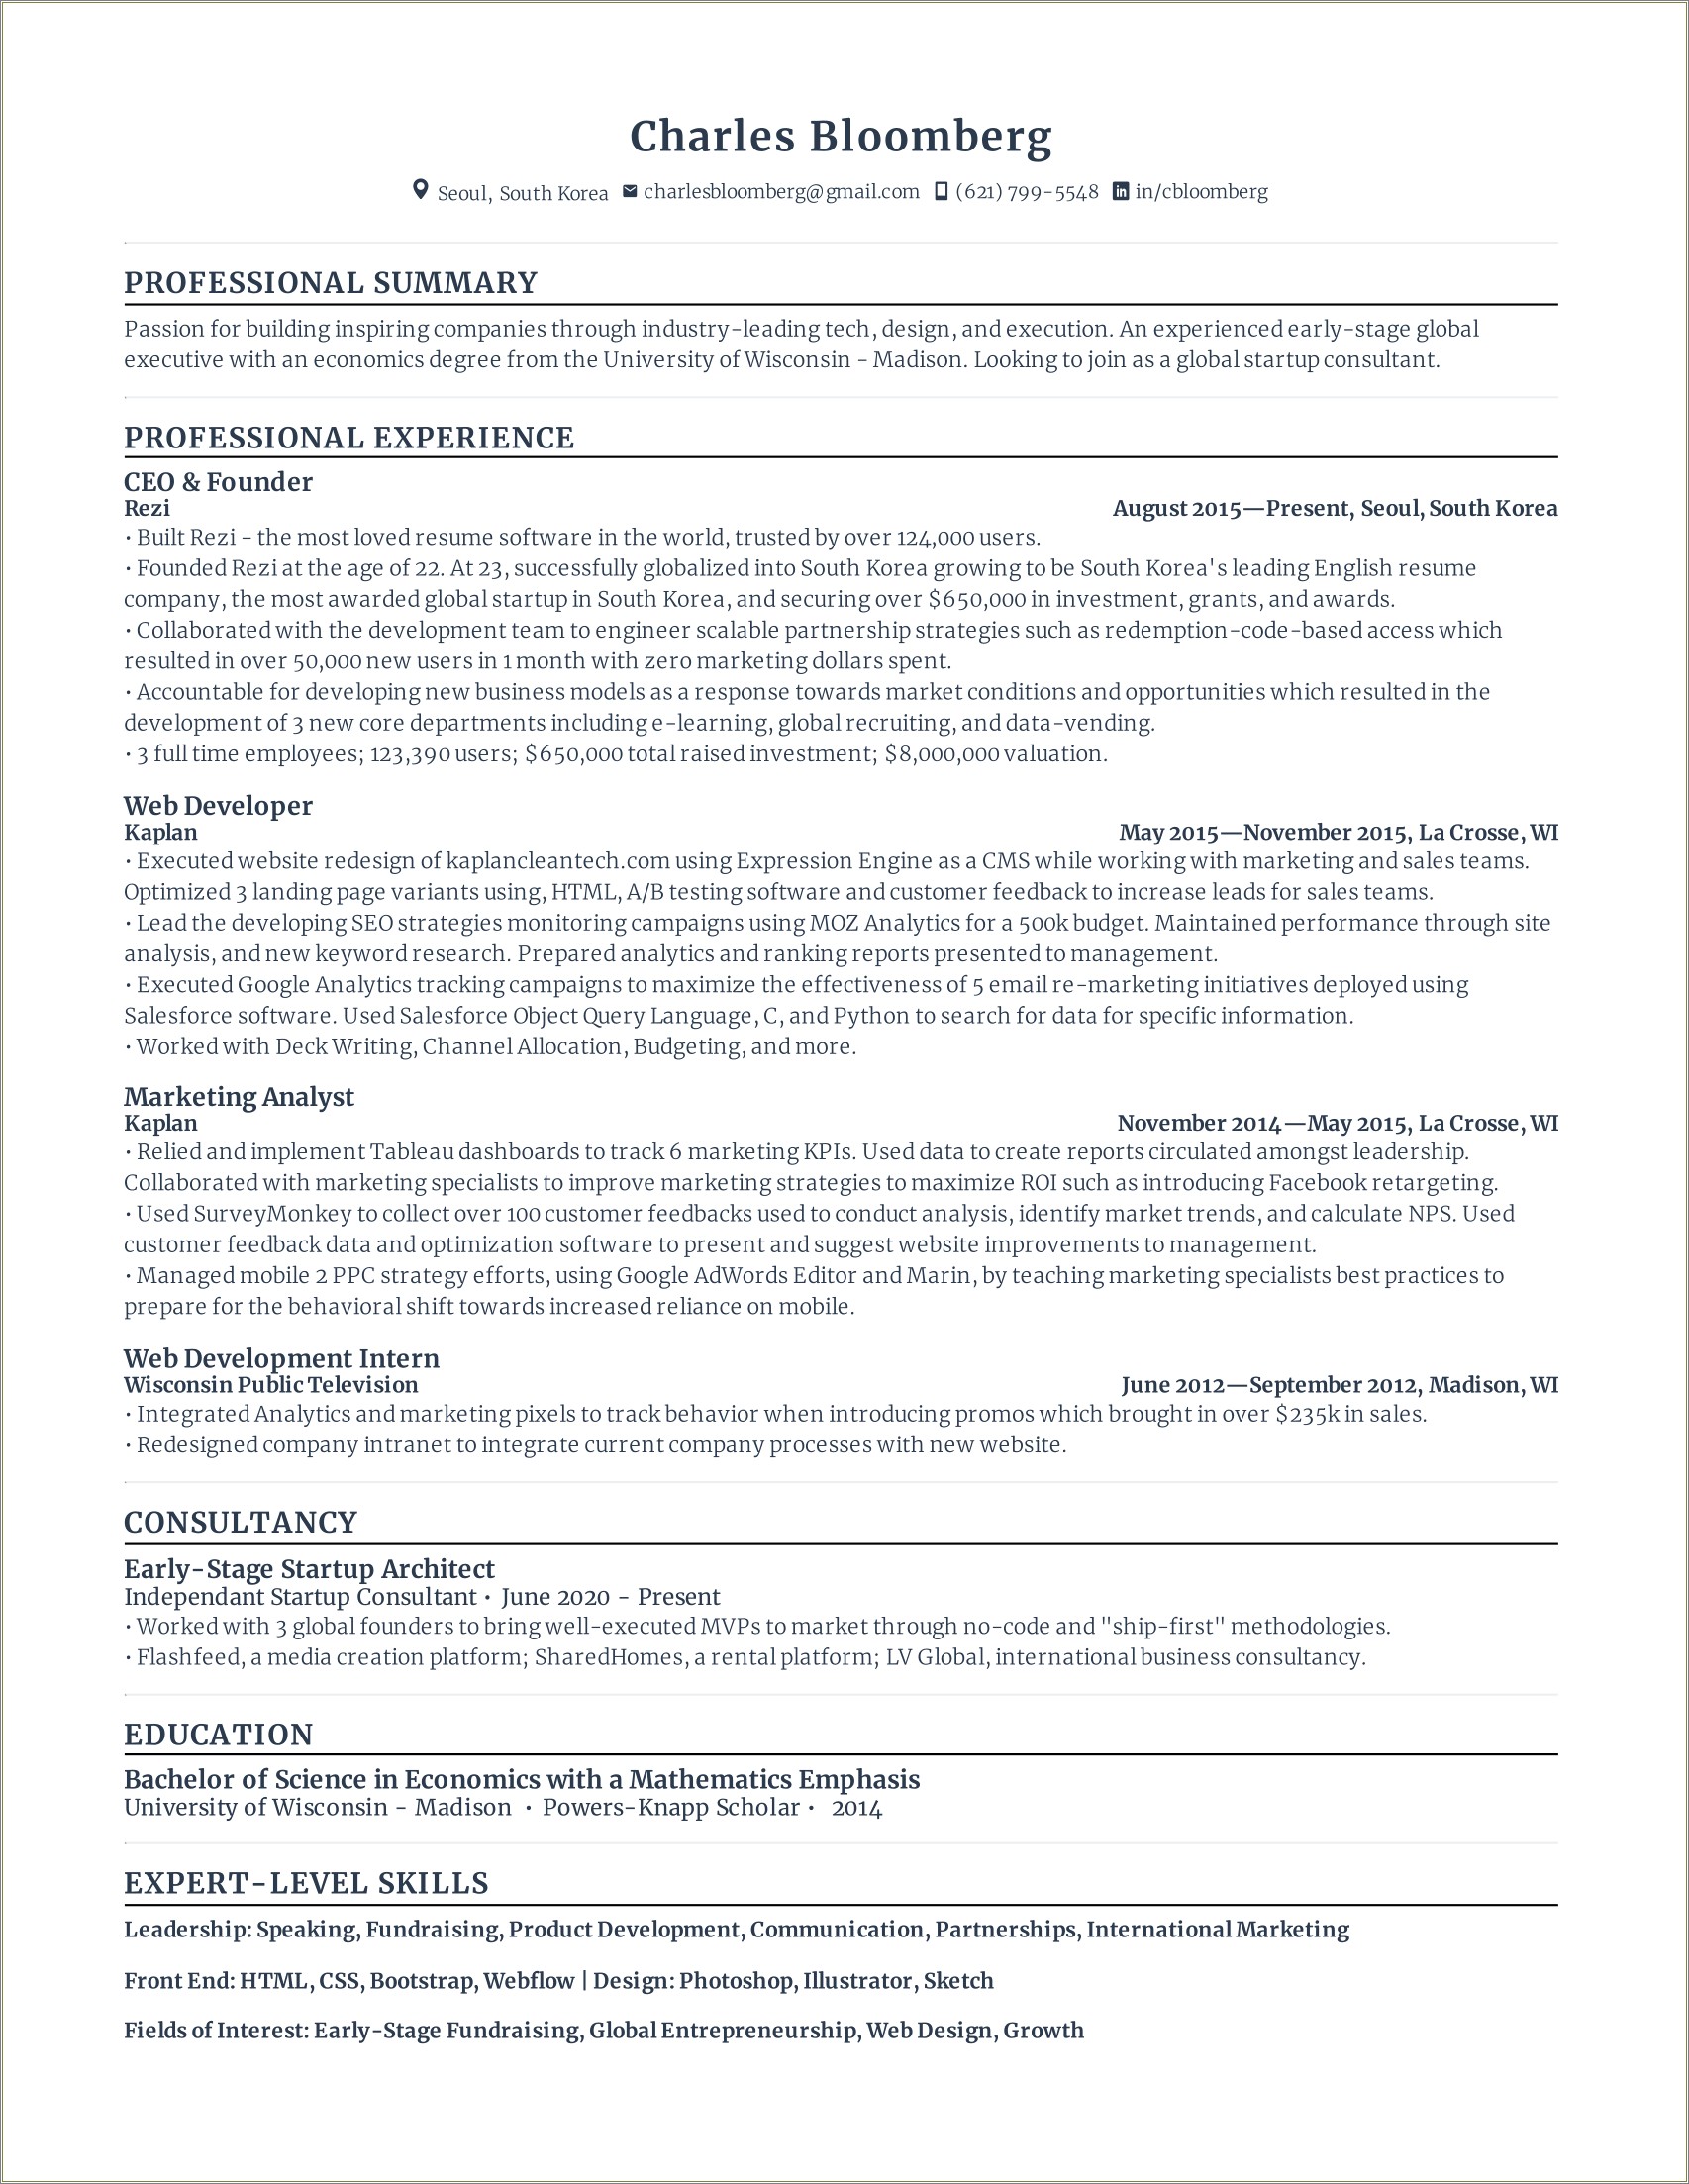 Creating A Professional Summary For A Resume